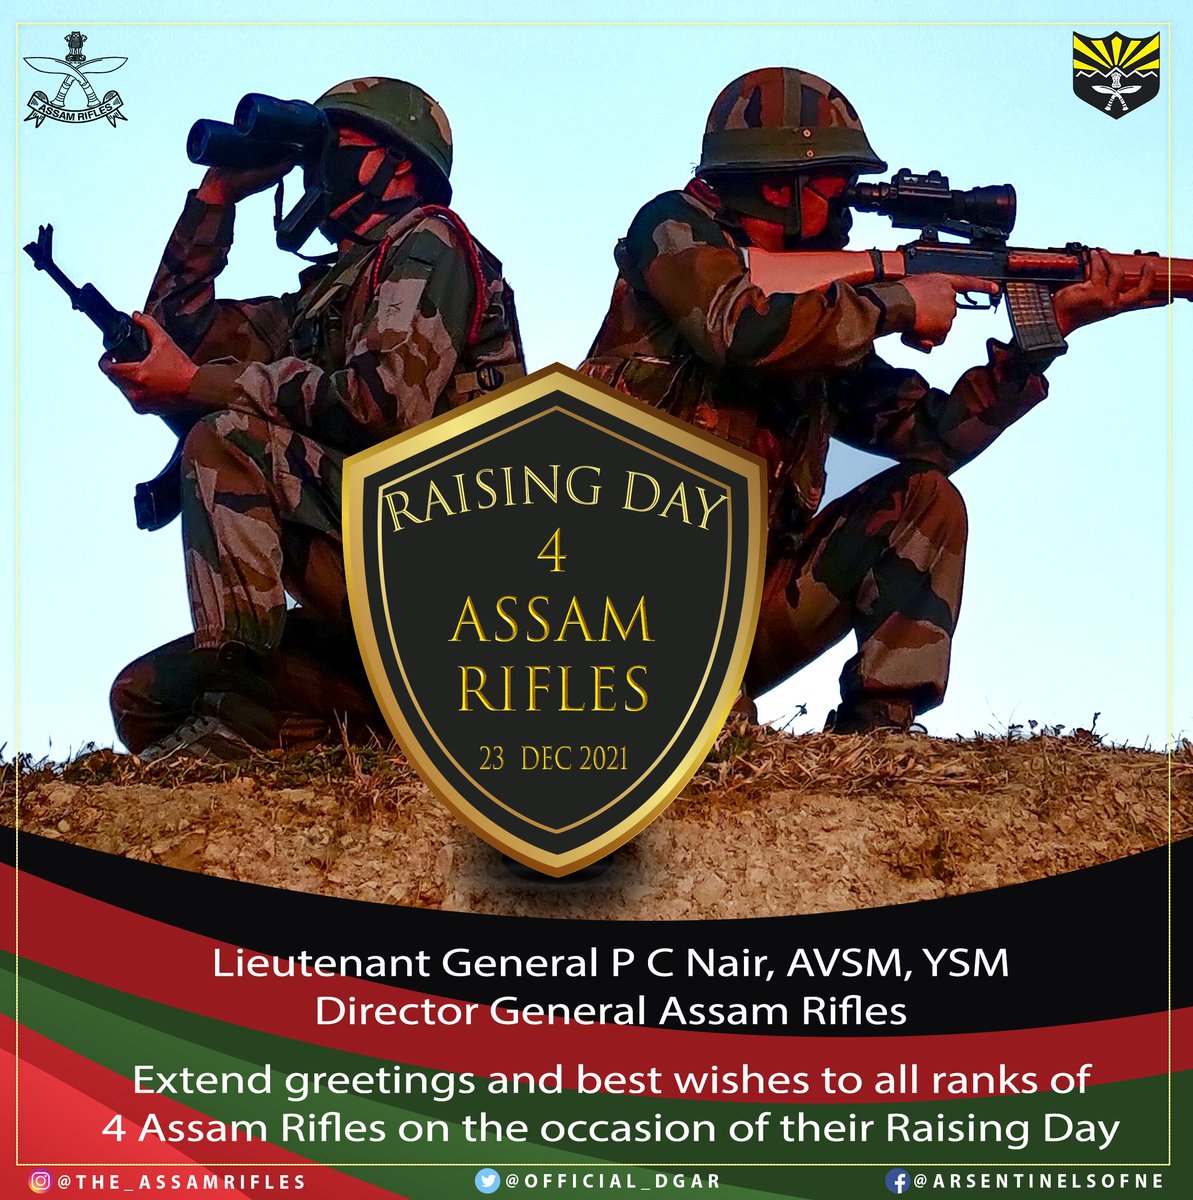 Lt Gen P C Nair, AVSM, YSM, Director General Assam Rifles 
Extend Greetings and Best Wishes to all ranks of 4 #AssamRifles on the occasion of their Raising Day.
.
.
#assamrifles #sentinelsofnortheast #friendsofnortheastpeople #raisingday #greetings #bestwishes #raisingdaywishes